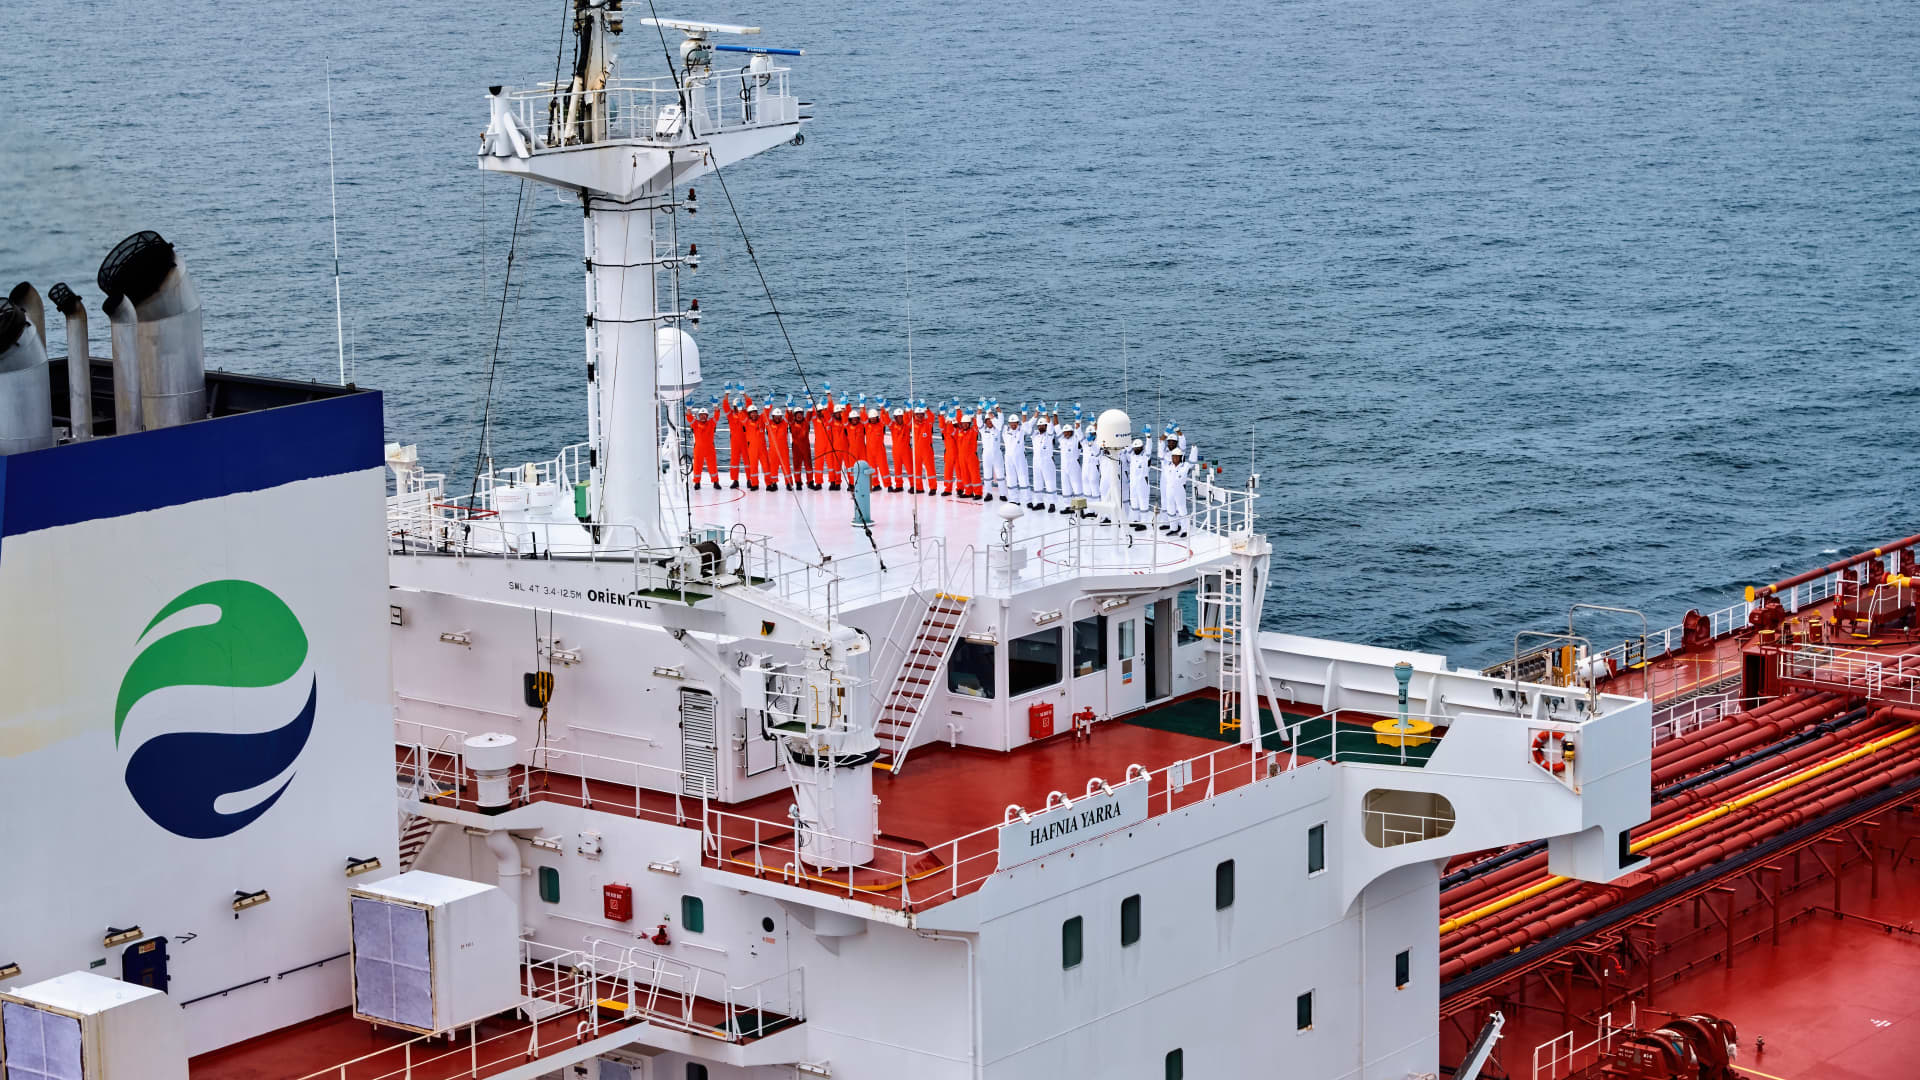 The crew on board an oil tanker operated by Hafnia.